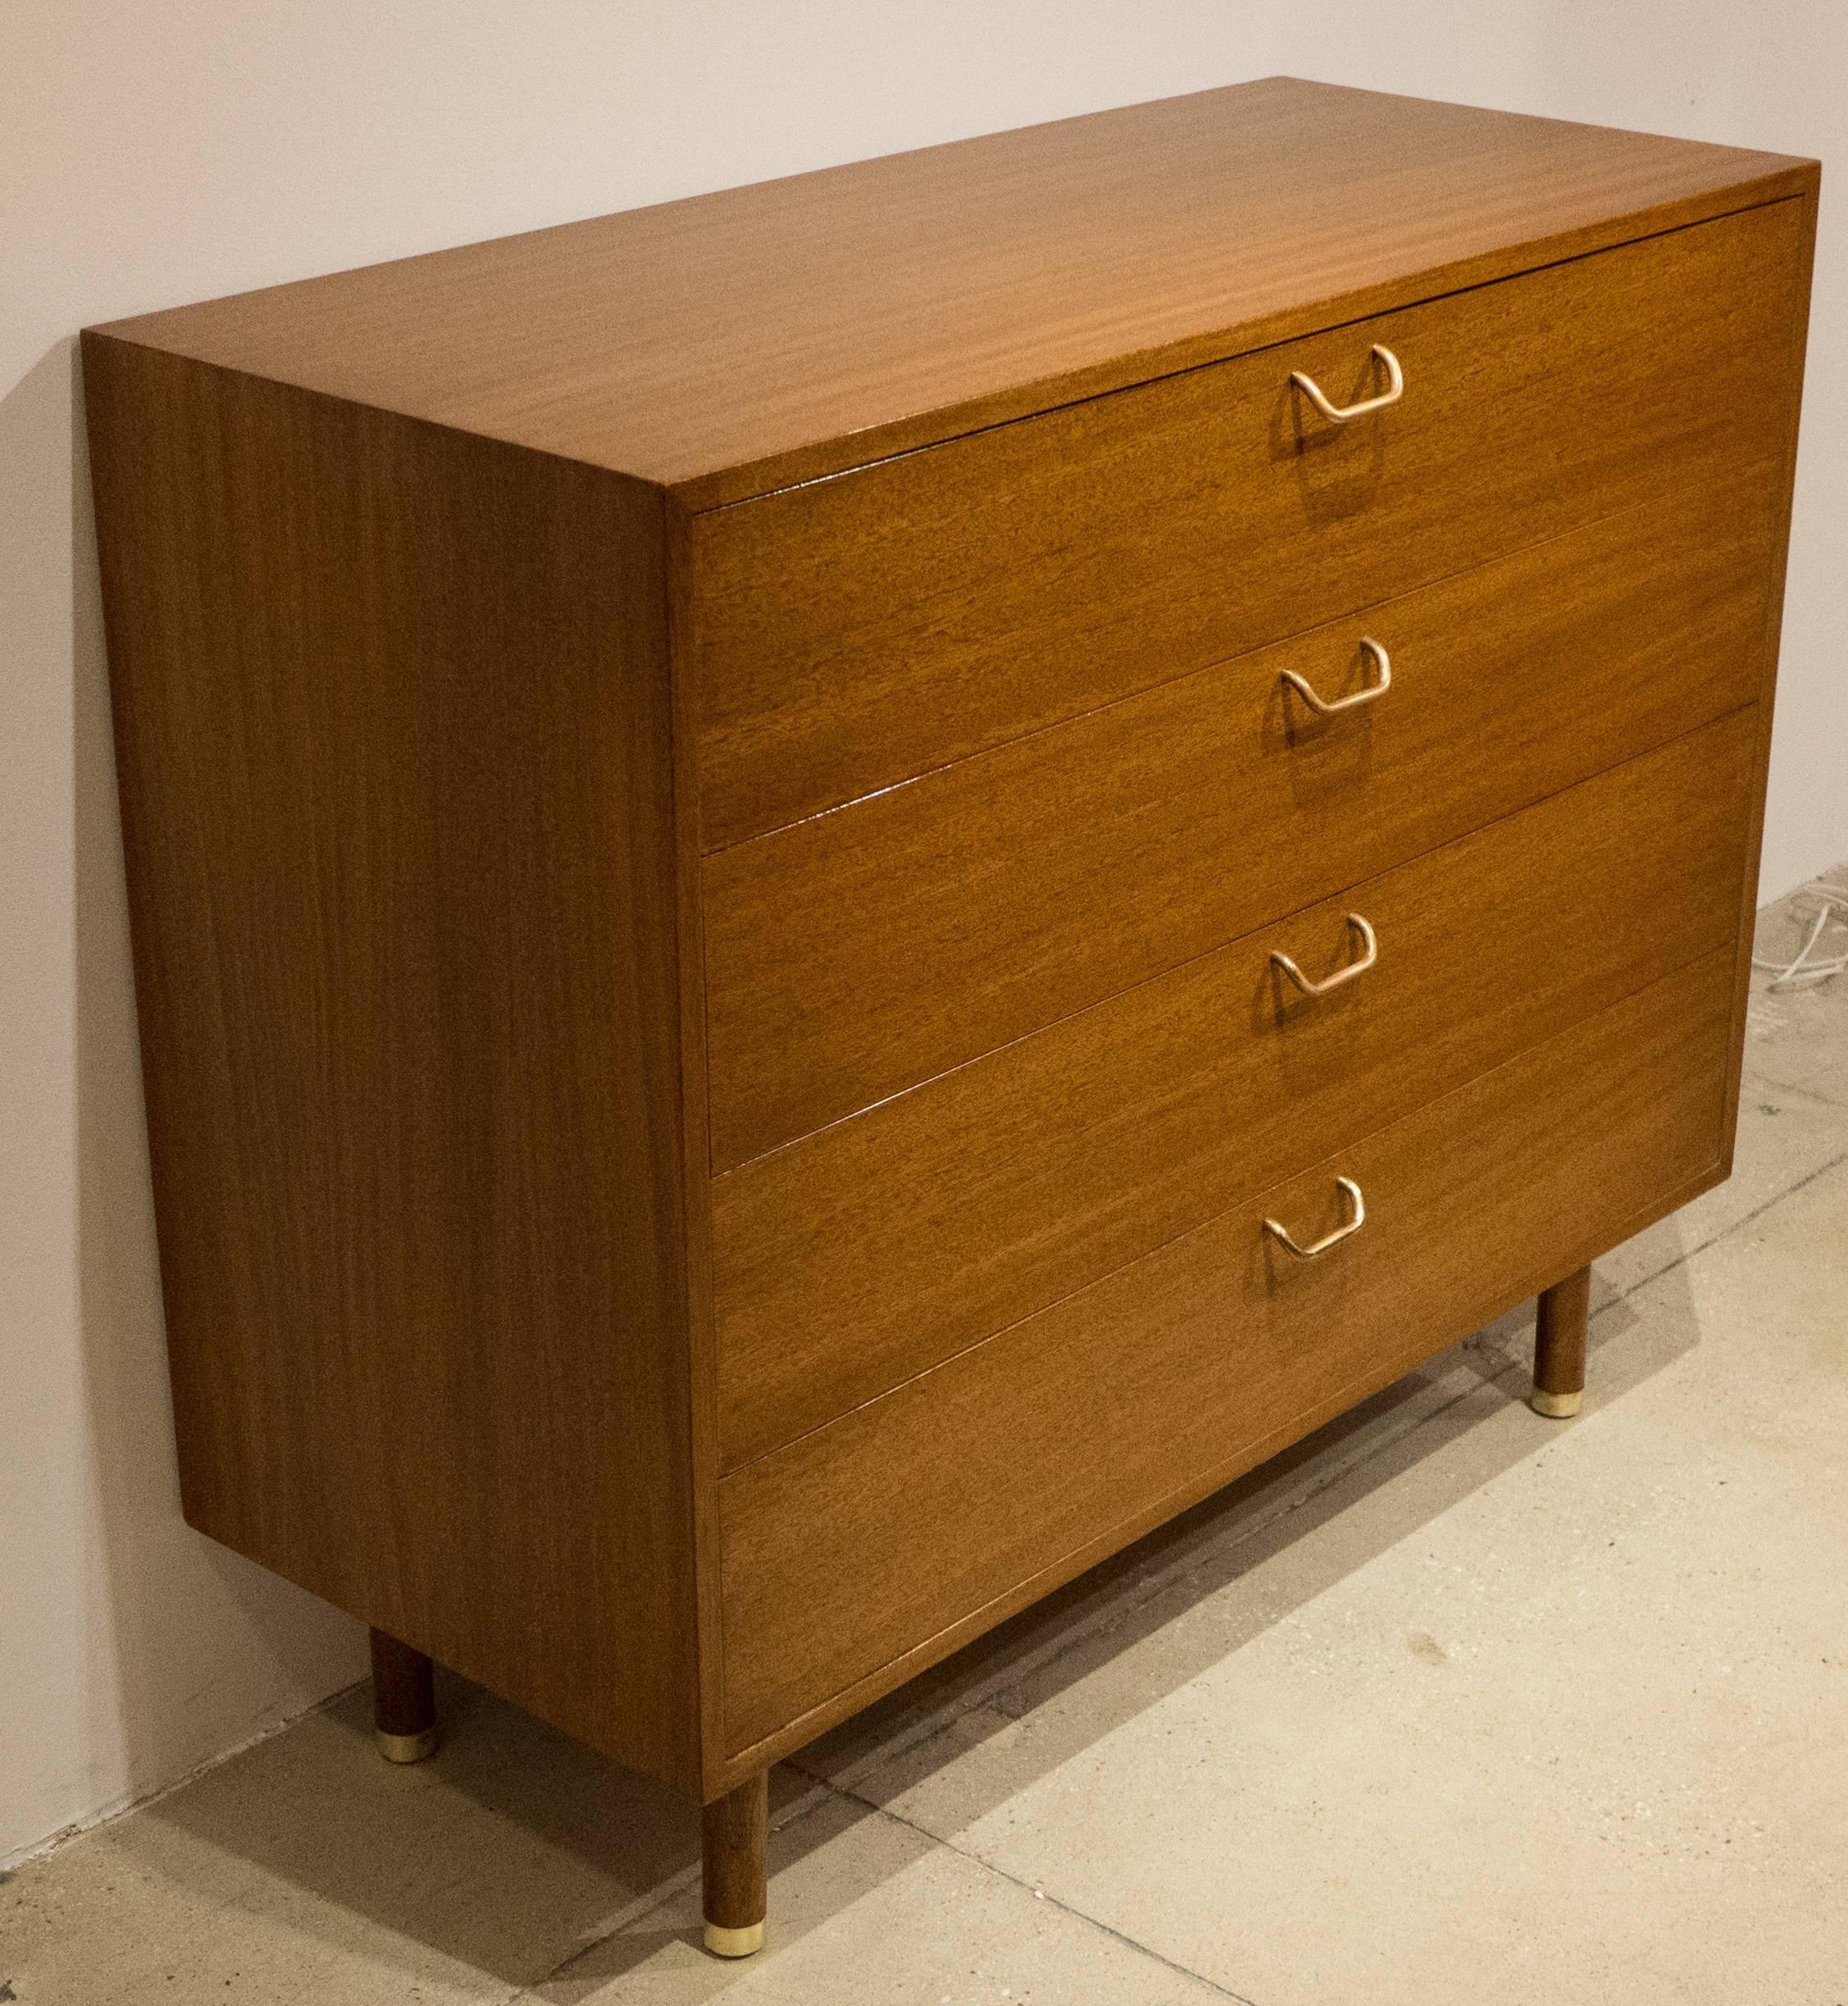 Four-drawer chest of drawers in bleached mahogany with cylindrical wooden legs and brass pulls and sabots. With solid oak secondary woods, dovetail-joined drawers, and a finished, white lacquered rear panel. Designed and produced by Harvey Probber,